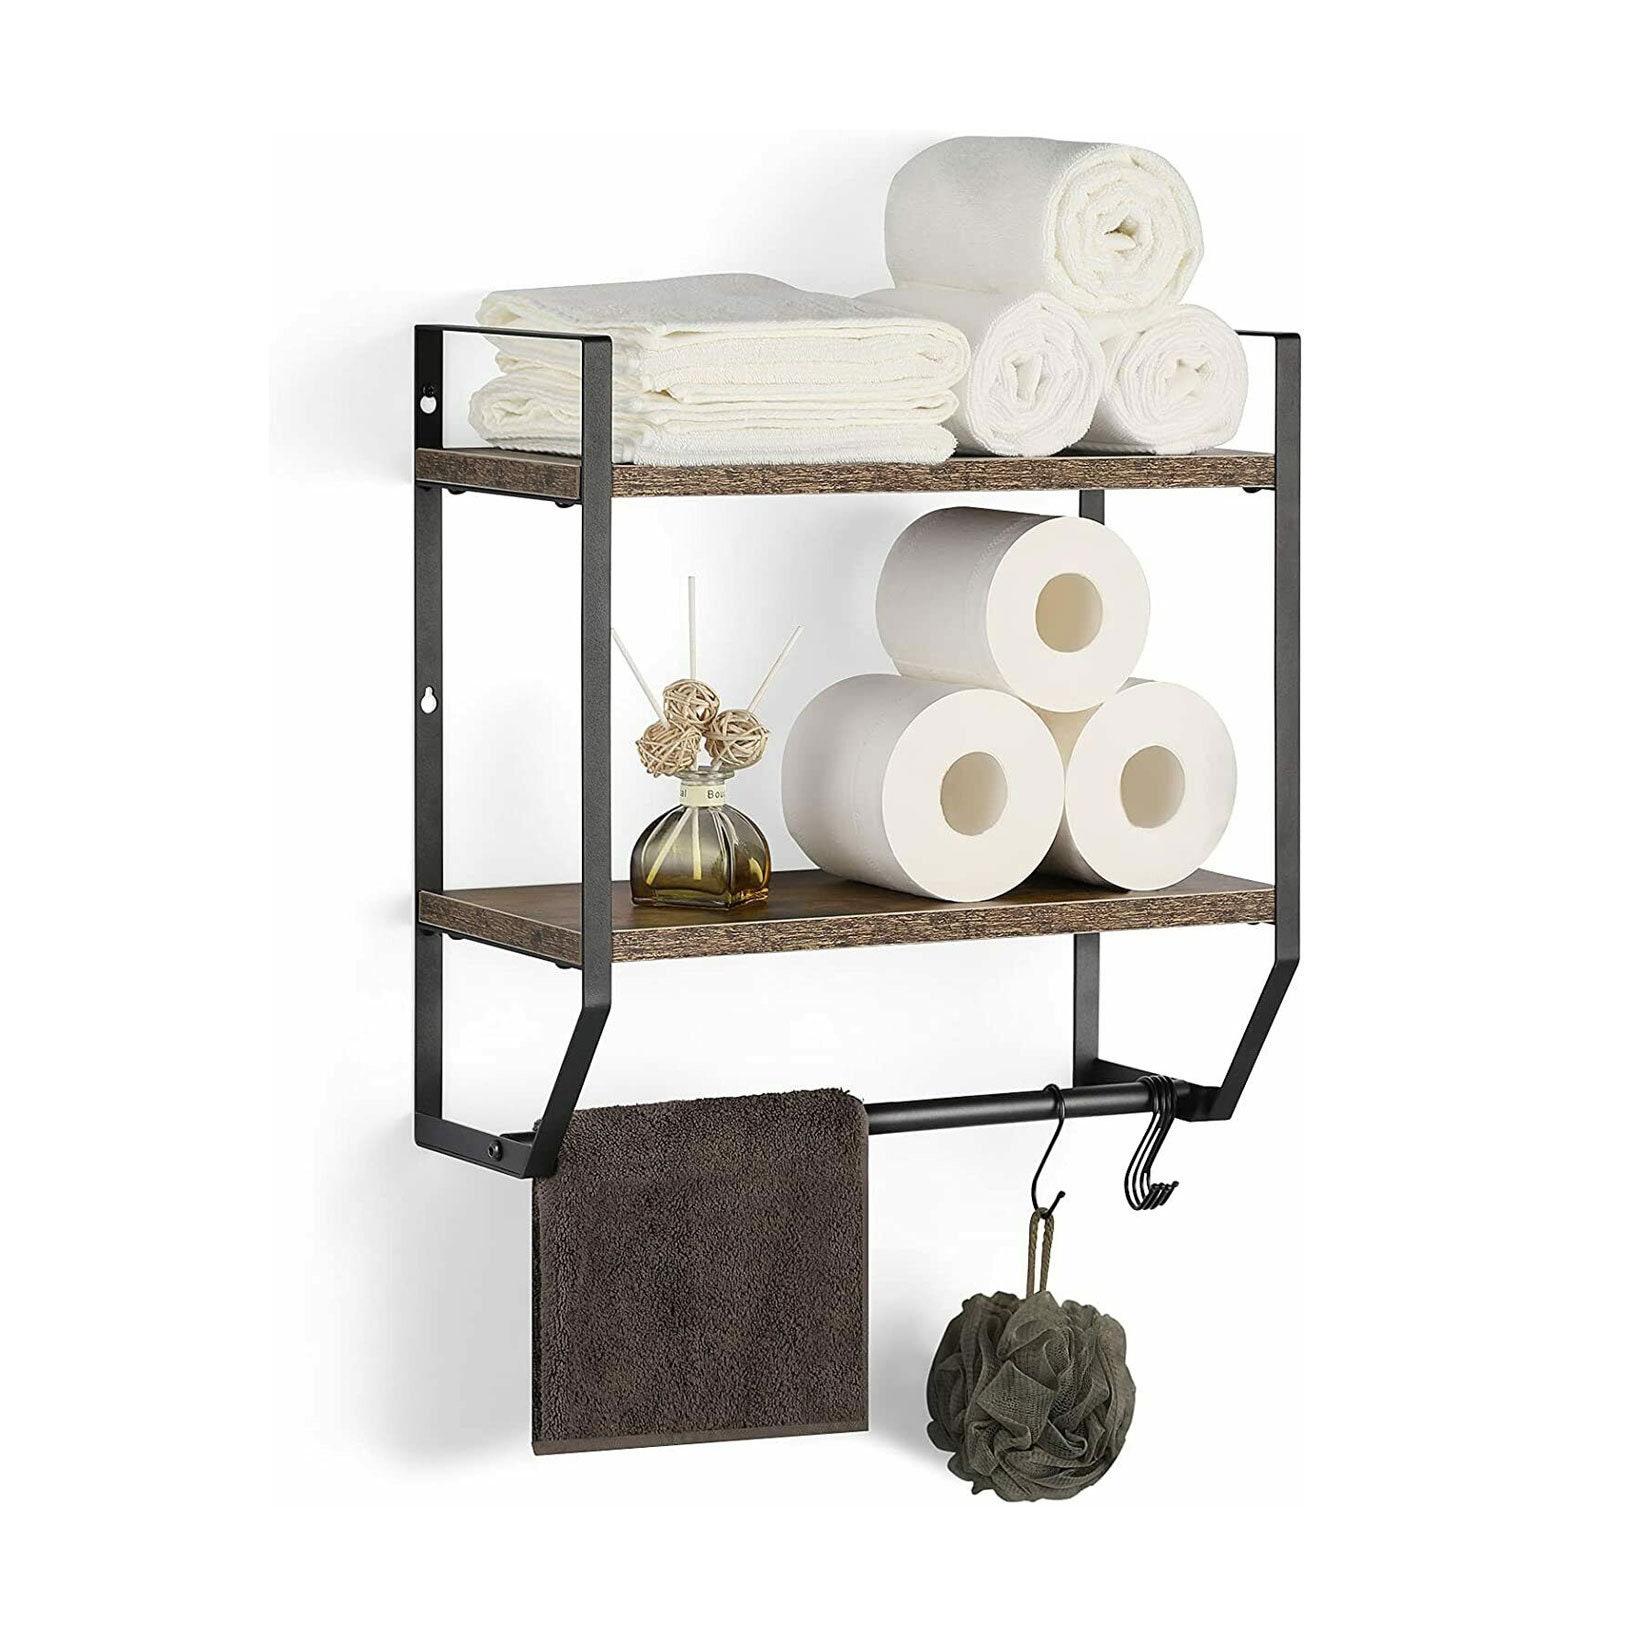 2 Tier Wall Mounted Torched Wood Bathroom Shelf Organizer with Hanging  Towel Bar